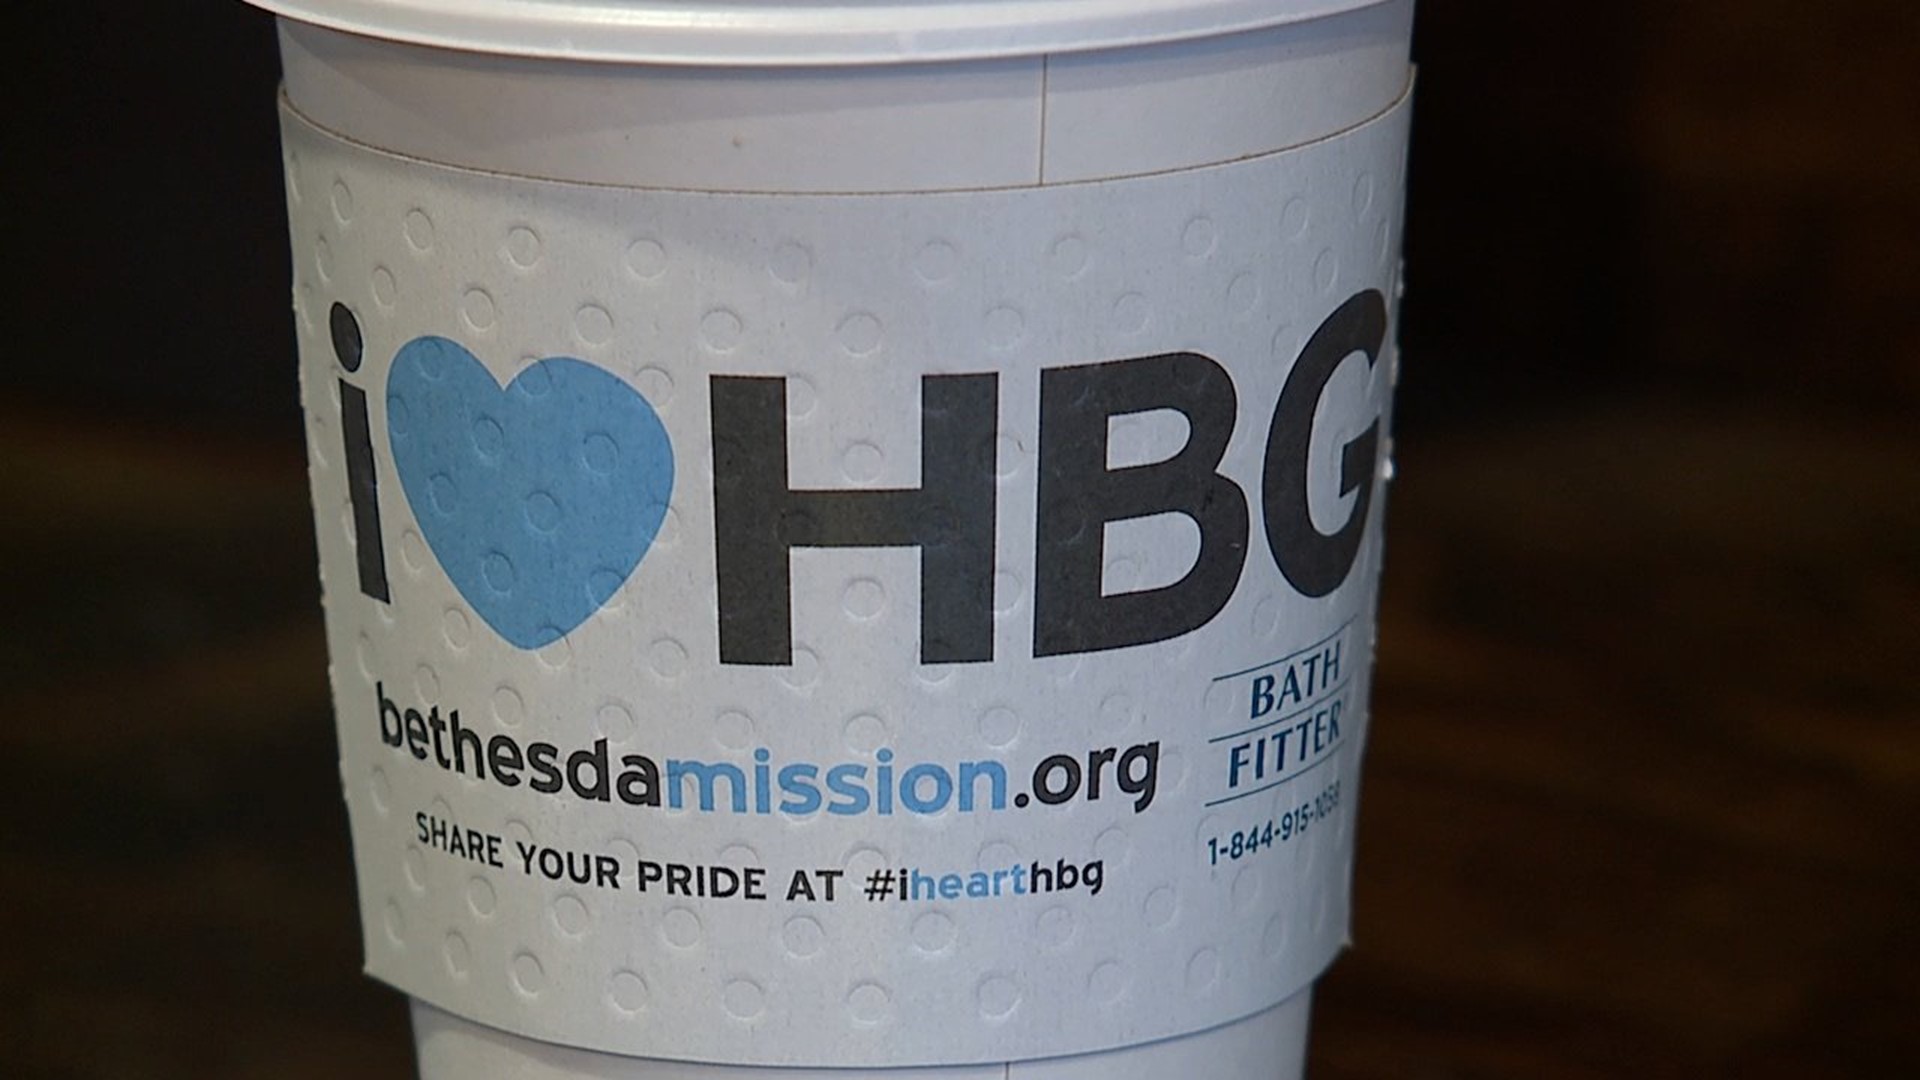 You can get your caffeine fix while showing your love for Harrisburg and support local women and children in need.